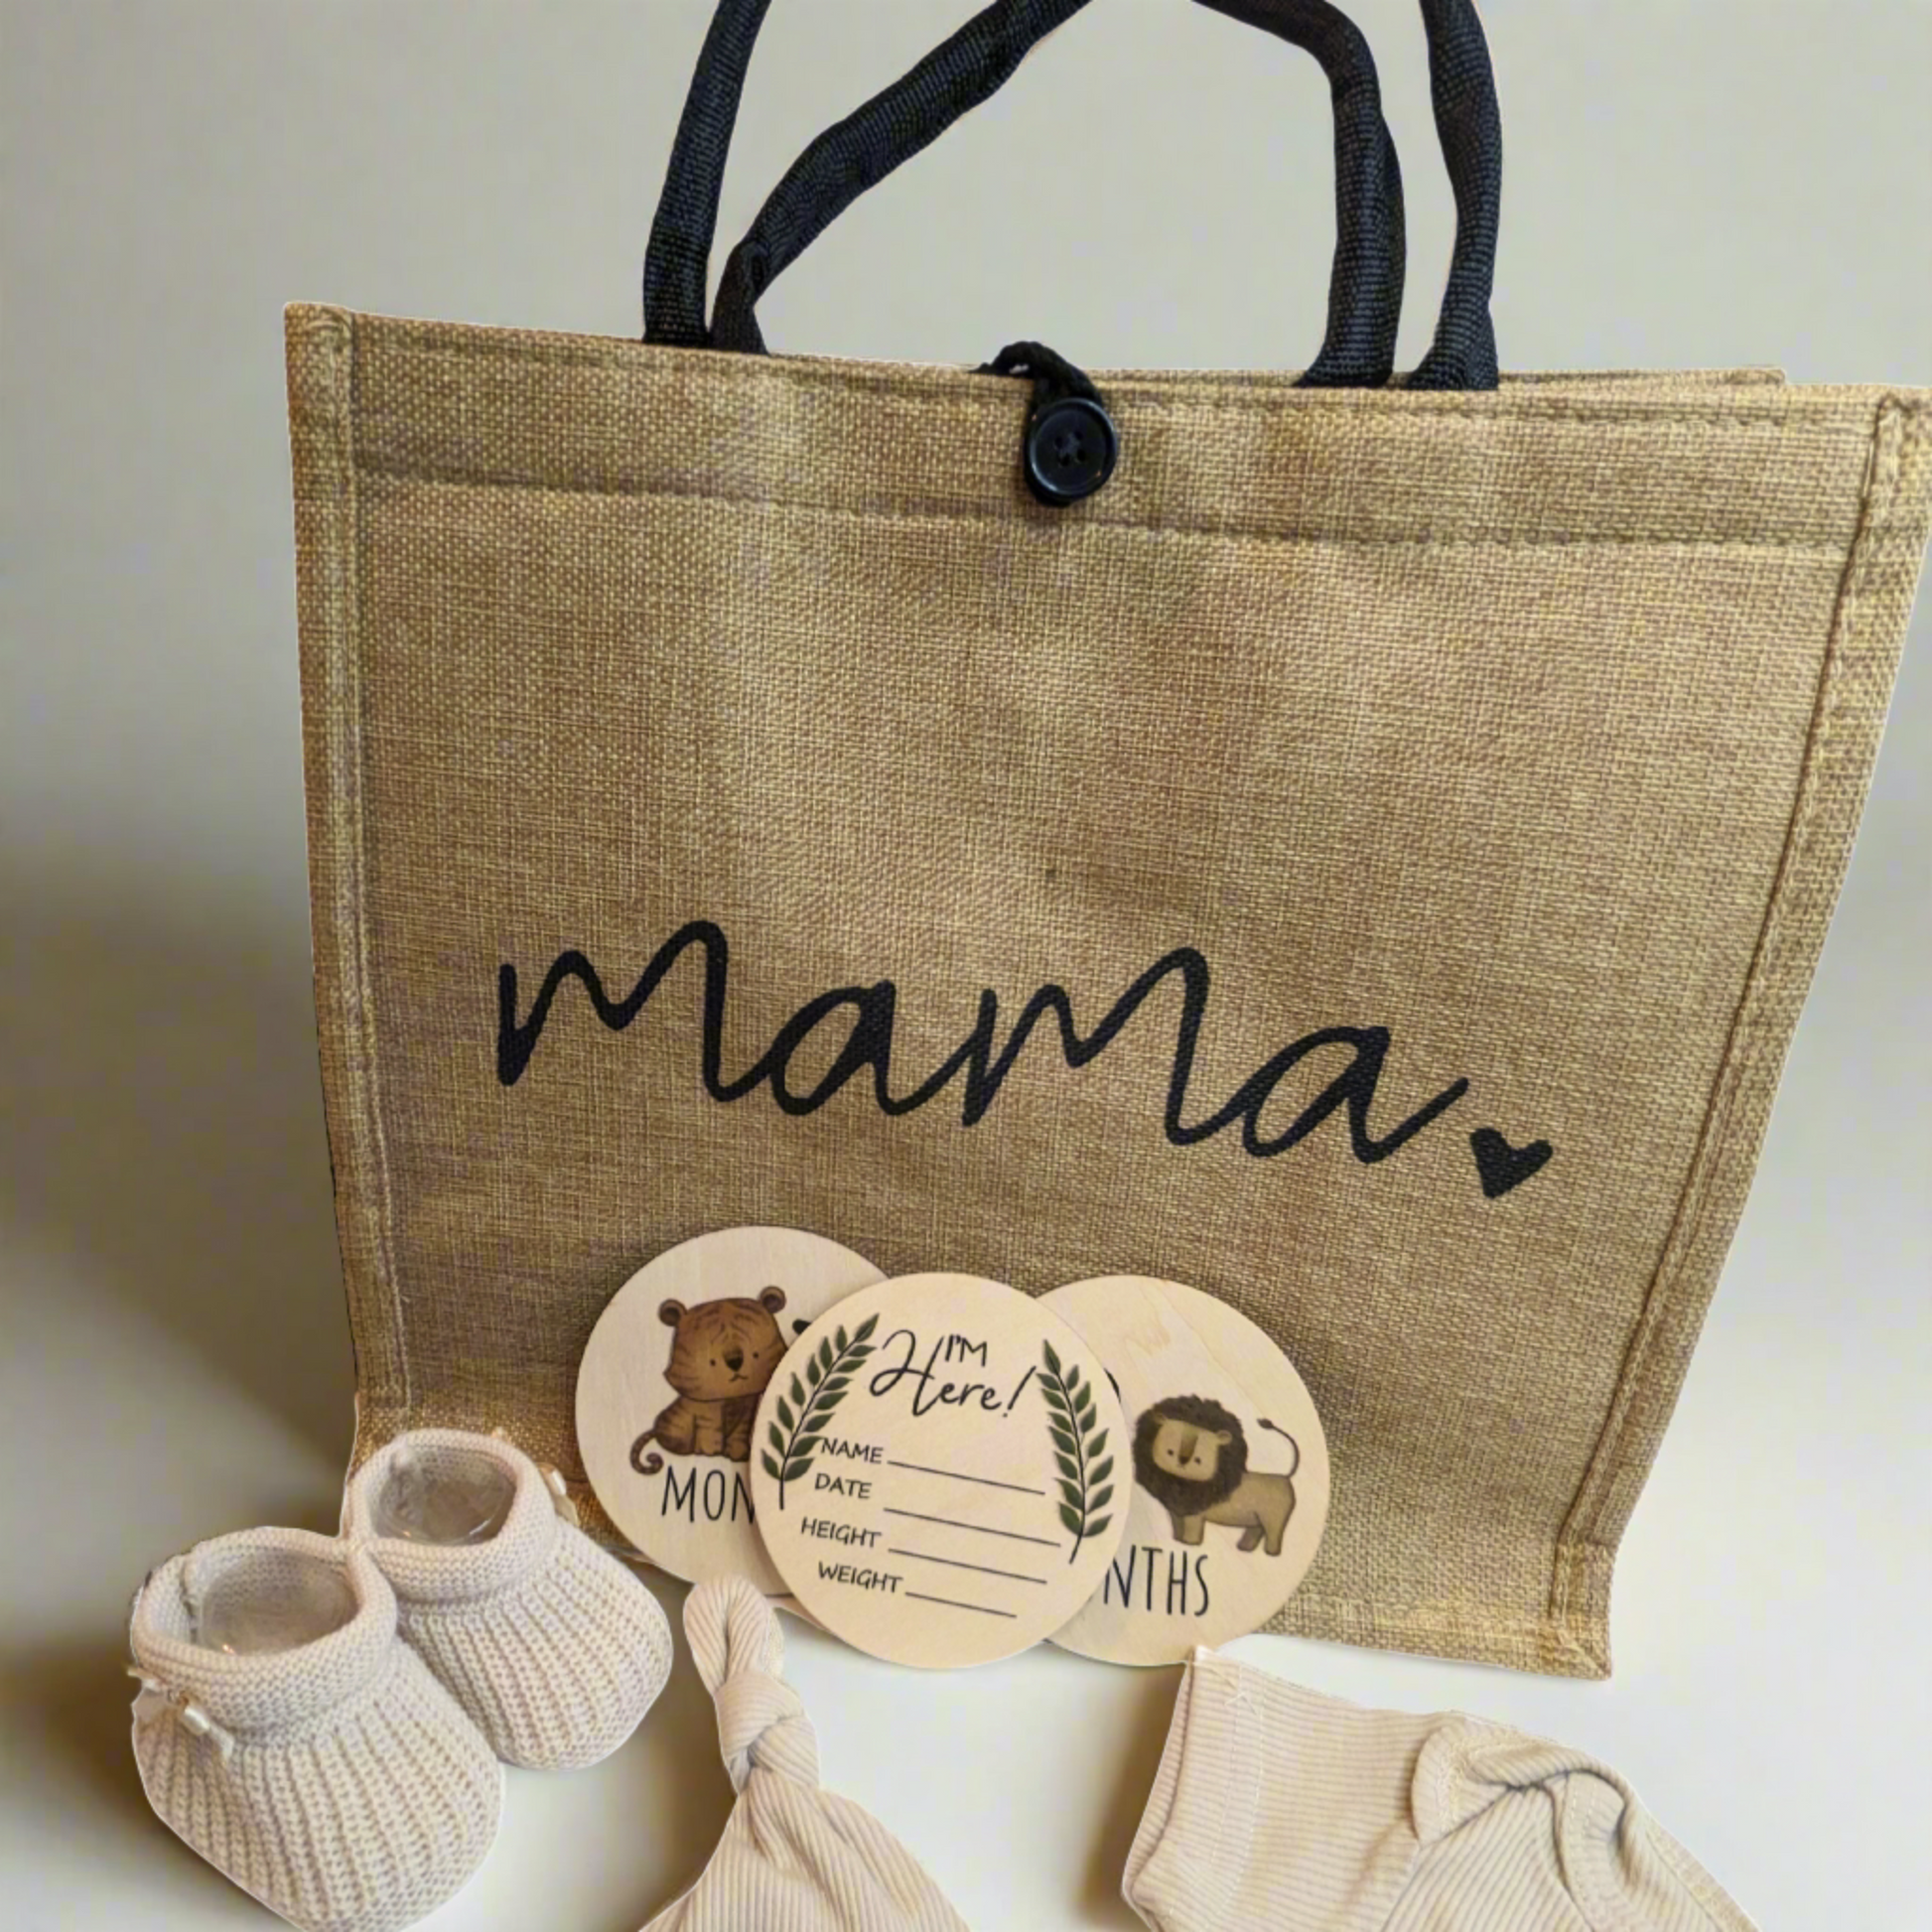 Mummy to be gift hamper including a hessian bag, eco-friendly baby clothes, milestone discs, and knit baby booties